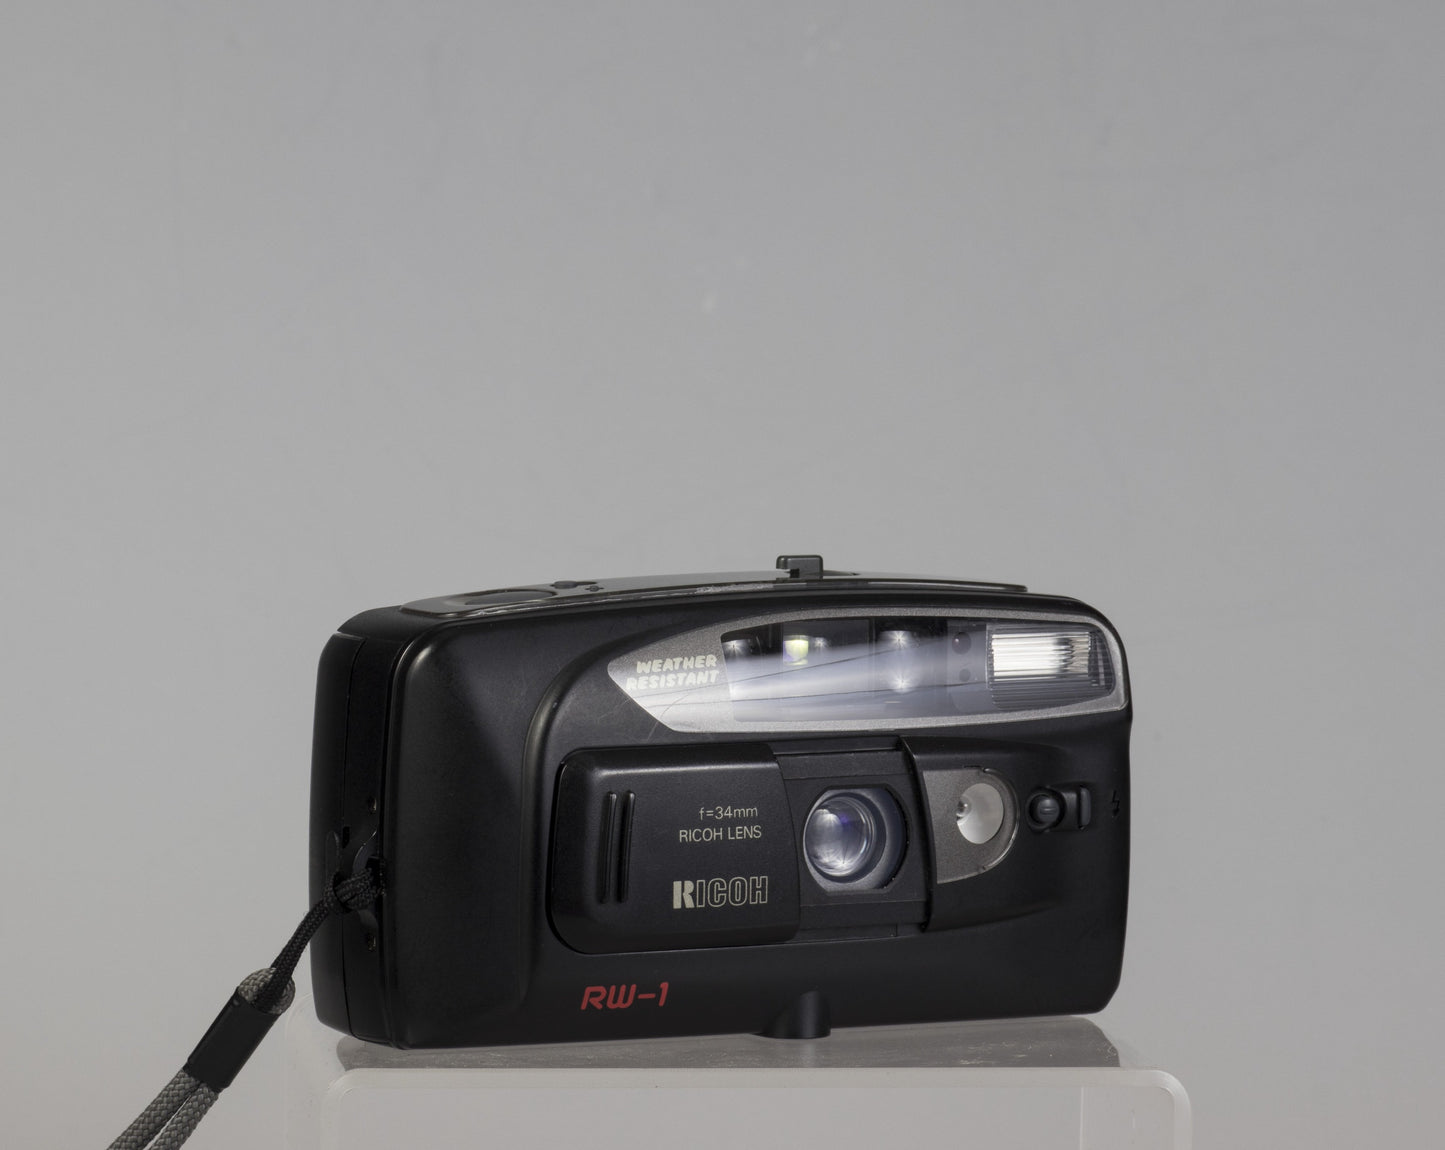 The Ricoh RW-1 Date is a 35mm film point-and-shoot camera from circa 1993. This camera features a 34mm lens and a weather resistant housing